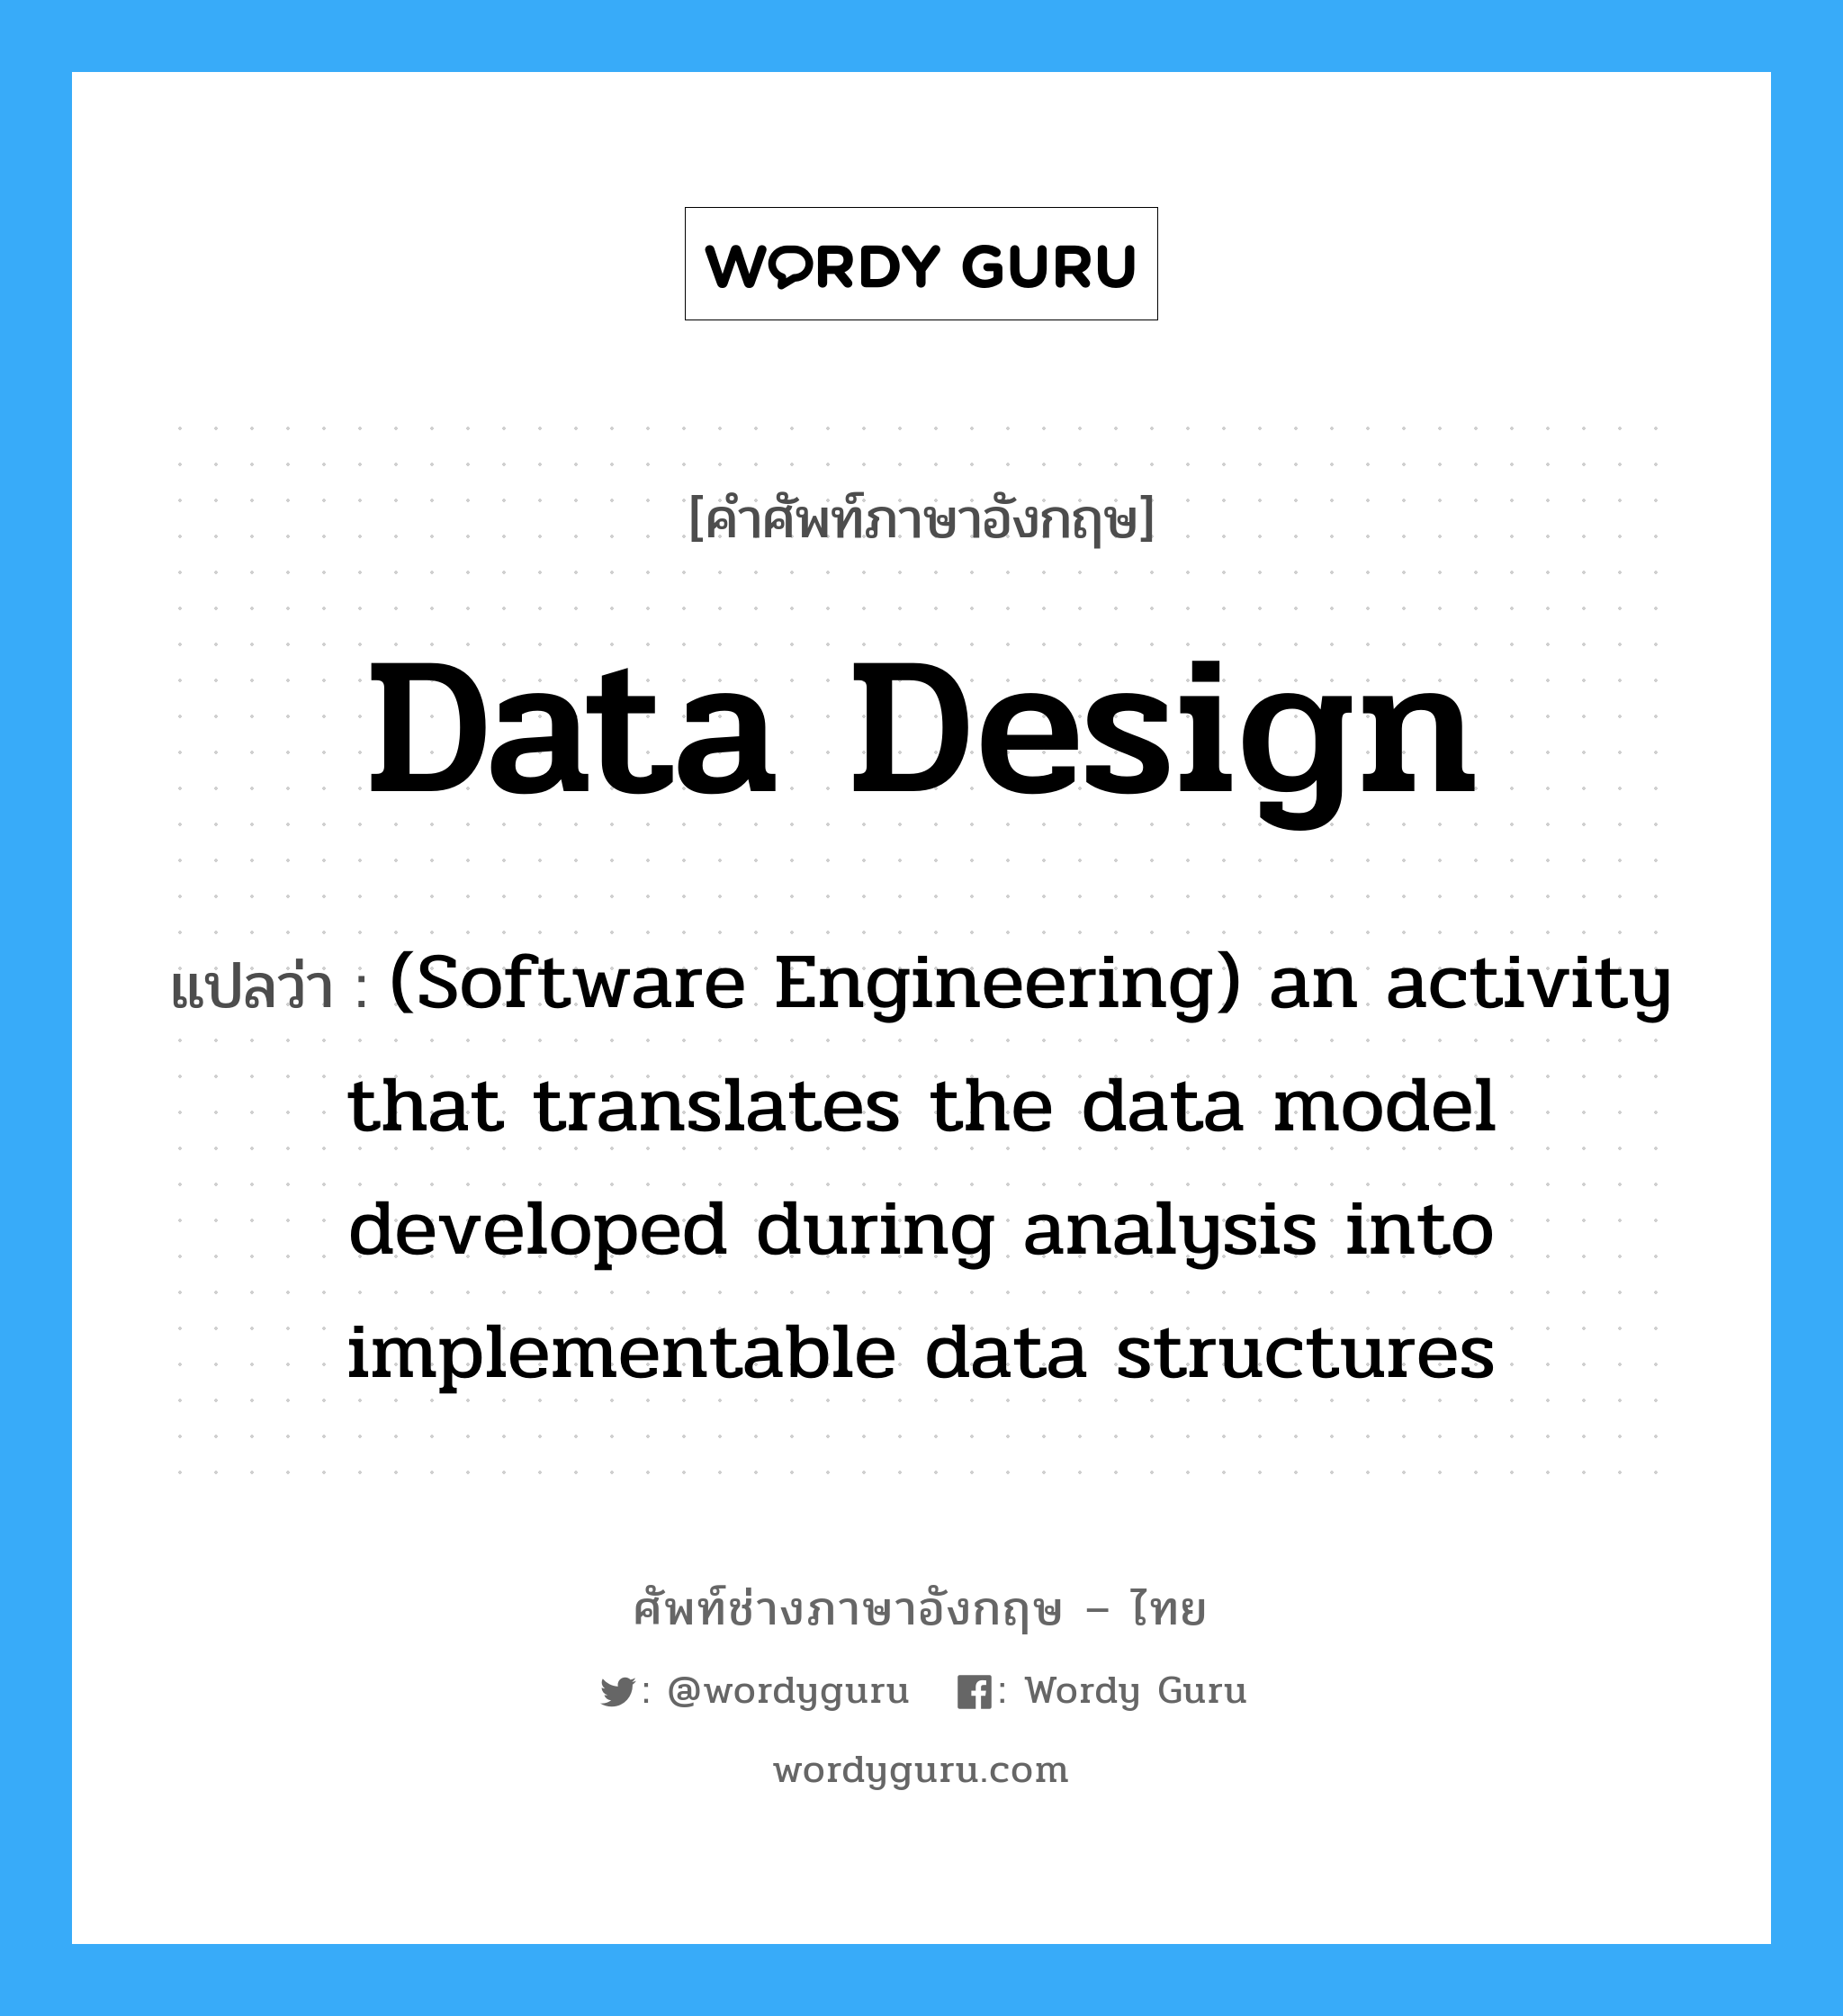 Data design แปลว่า?, คำศัพท์ช่างภาษาอังกฤษ - ไทย Data design คำศัพท์ภาษาอังกฤษ Data design แปลว่า (Software Engineering) an activity that translates the data model developed during analysis into implementable data structures